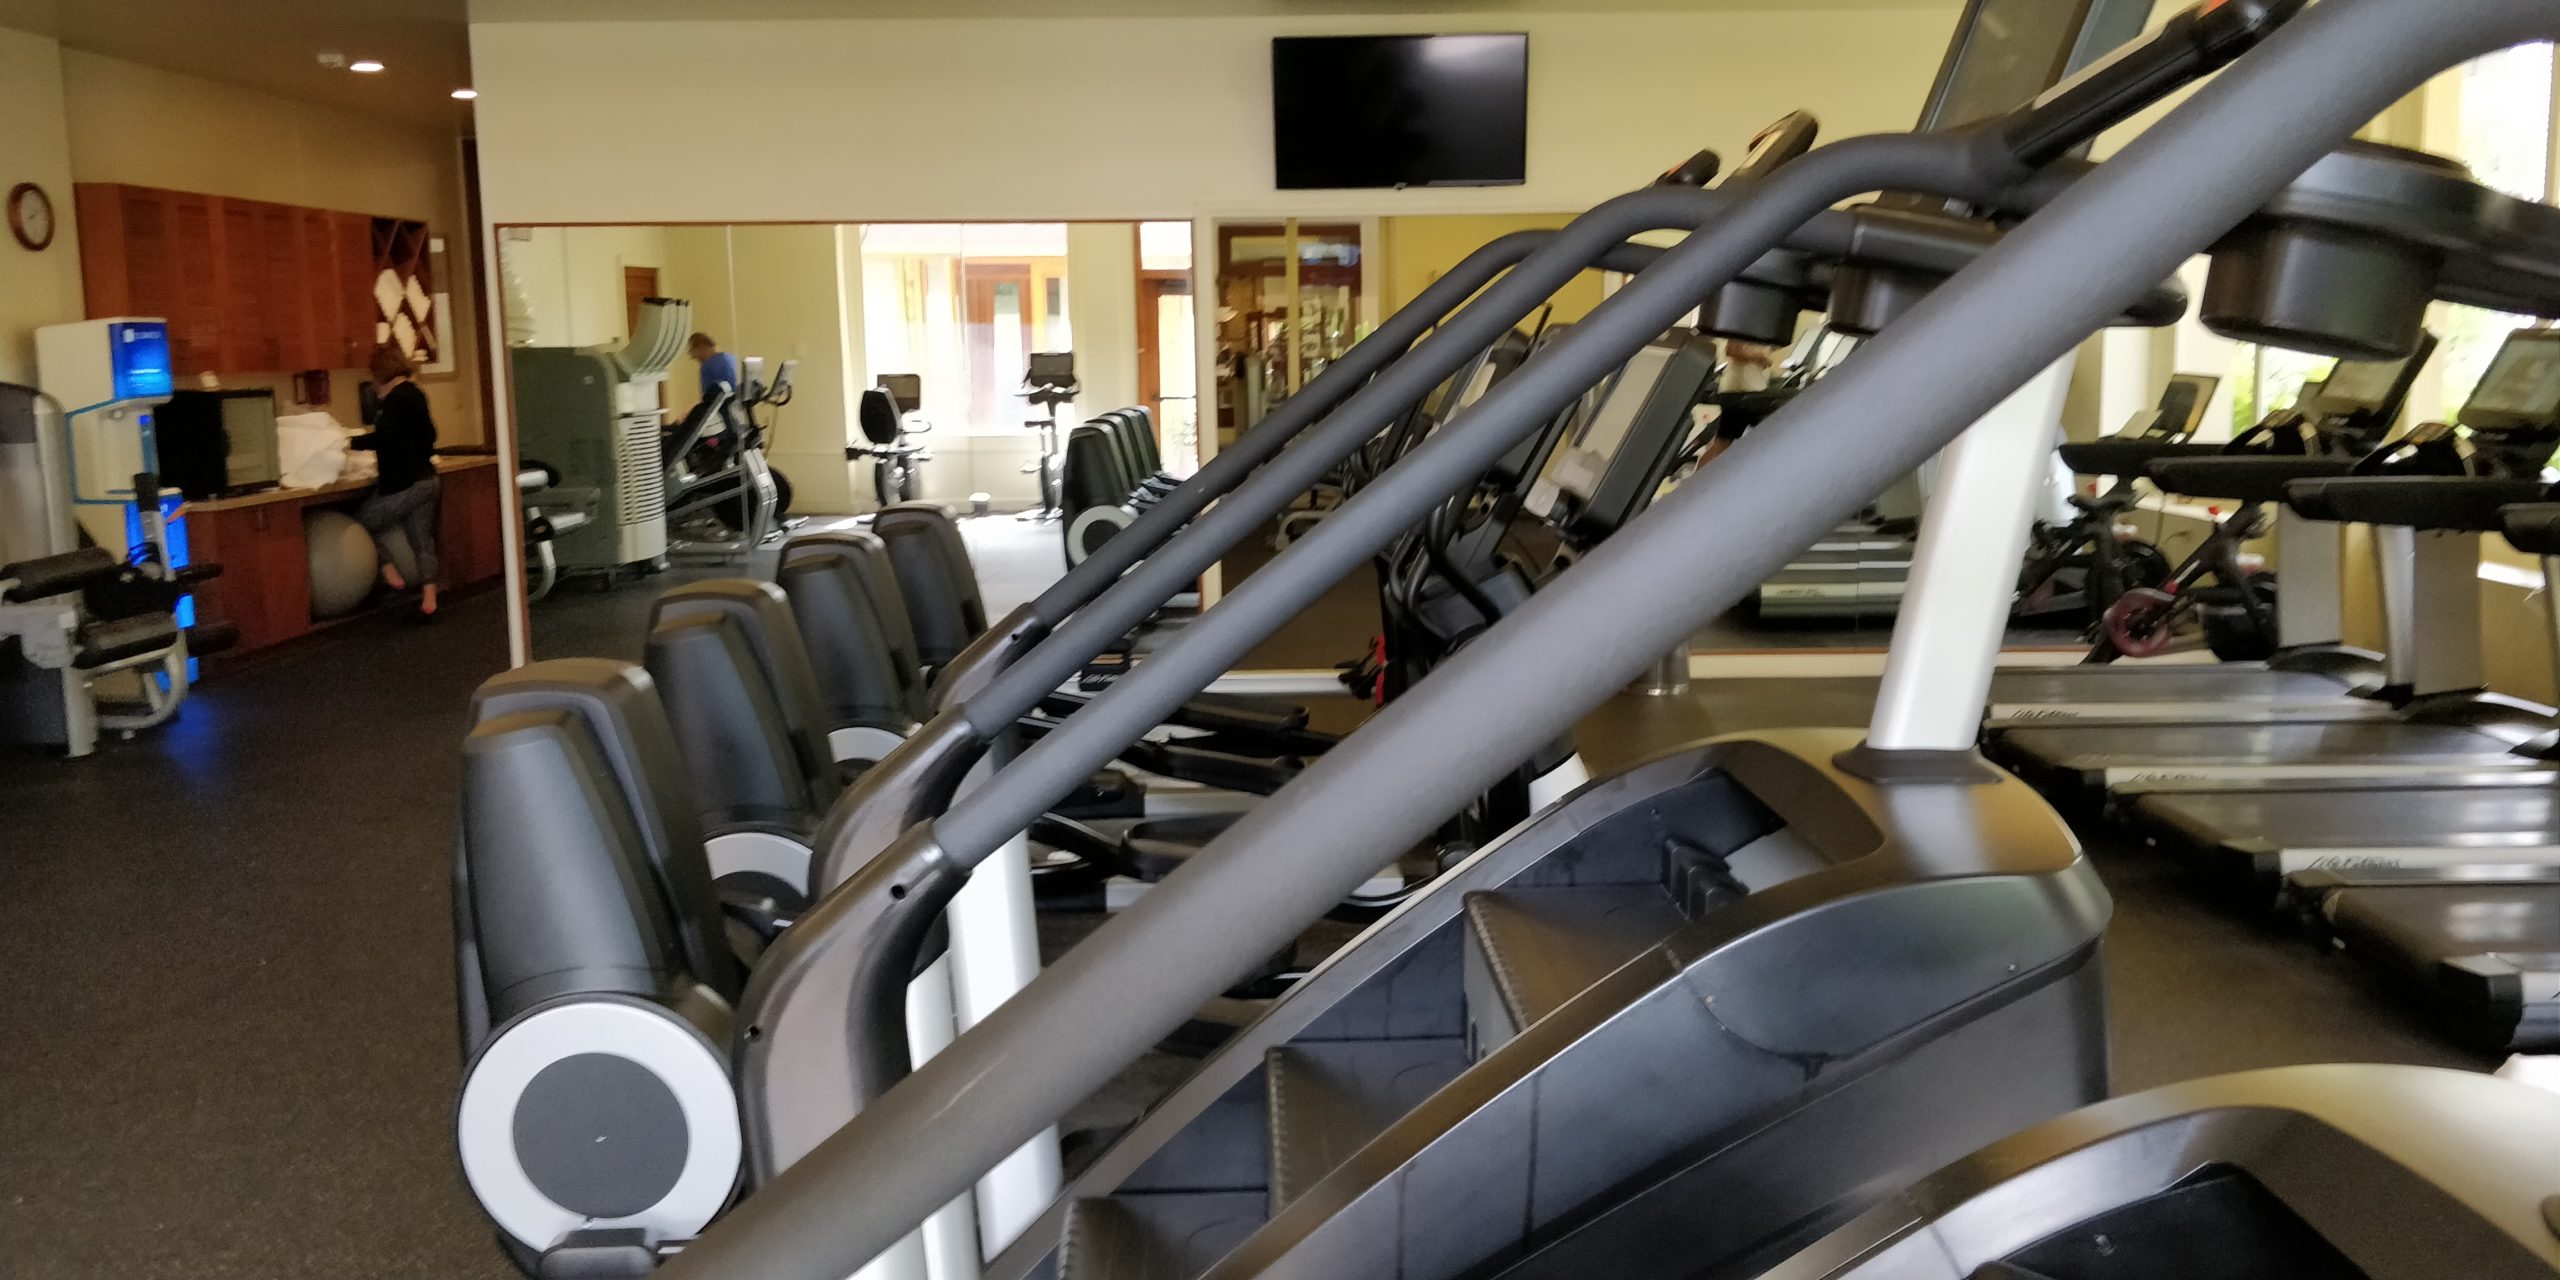 EXERCISE MACHINES IN THE GYM